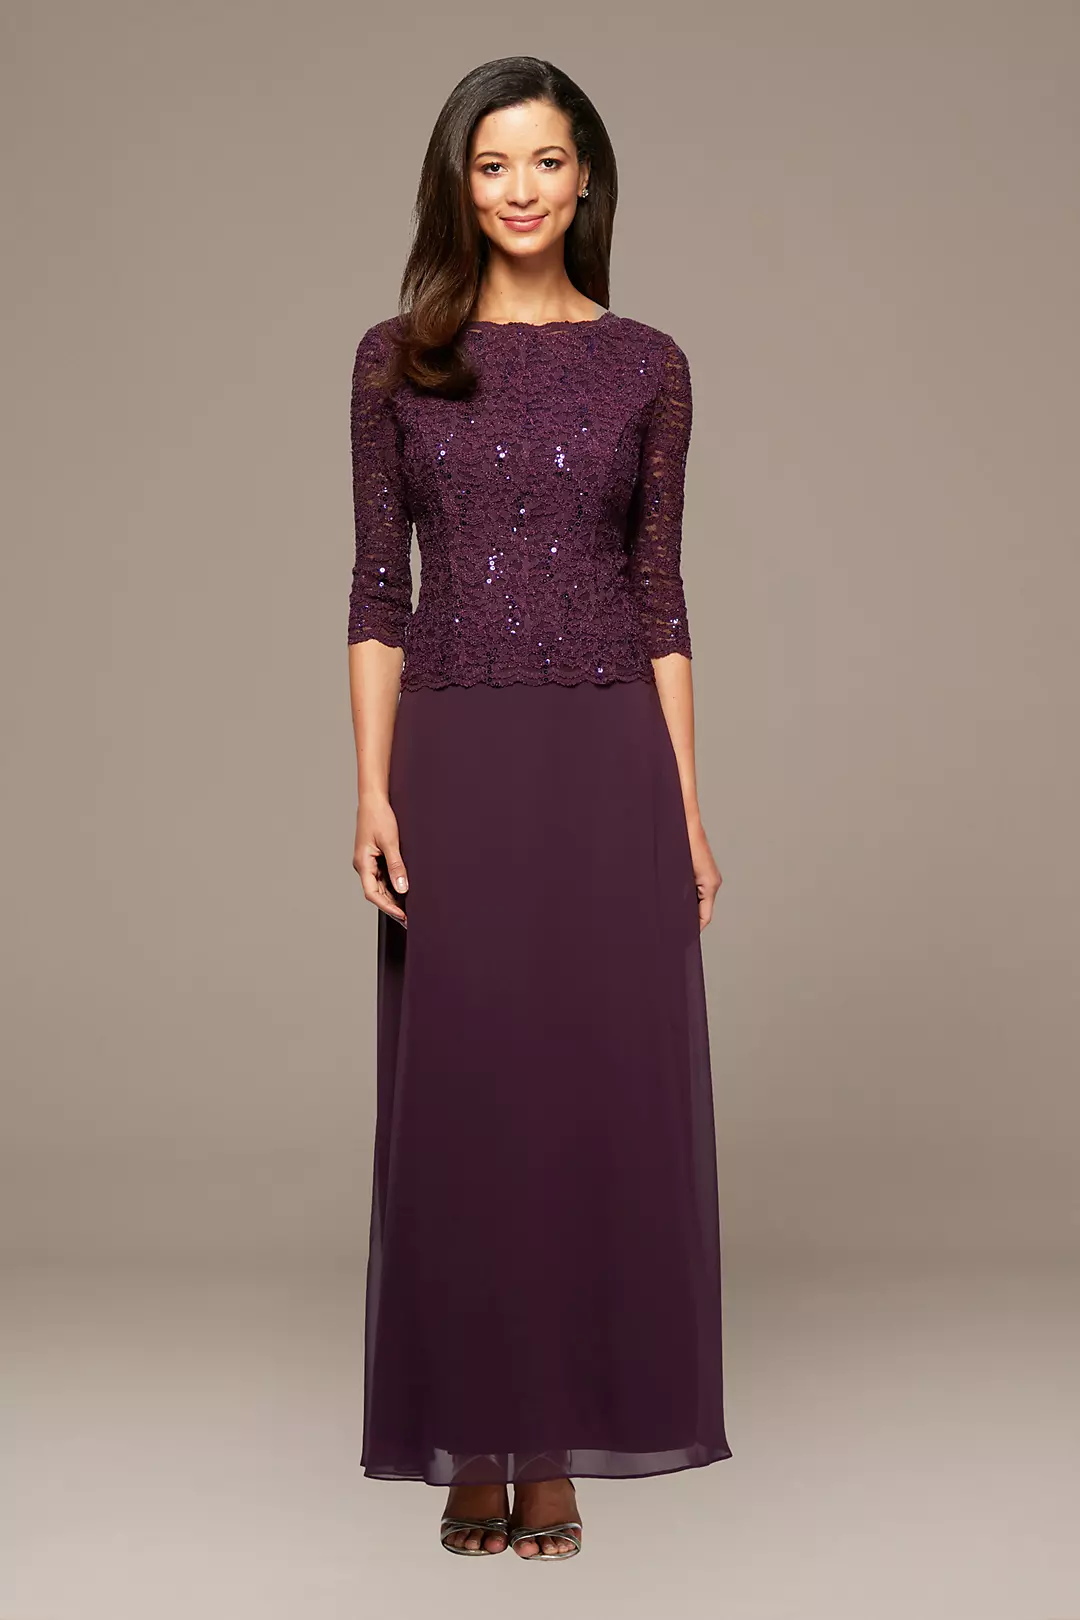 Sequin Lace Boatneck Petite Gown Image